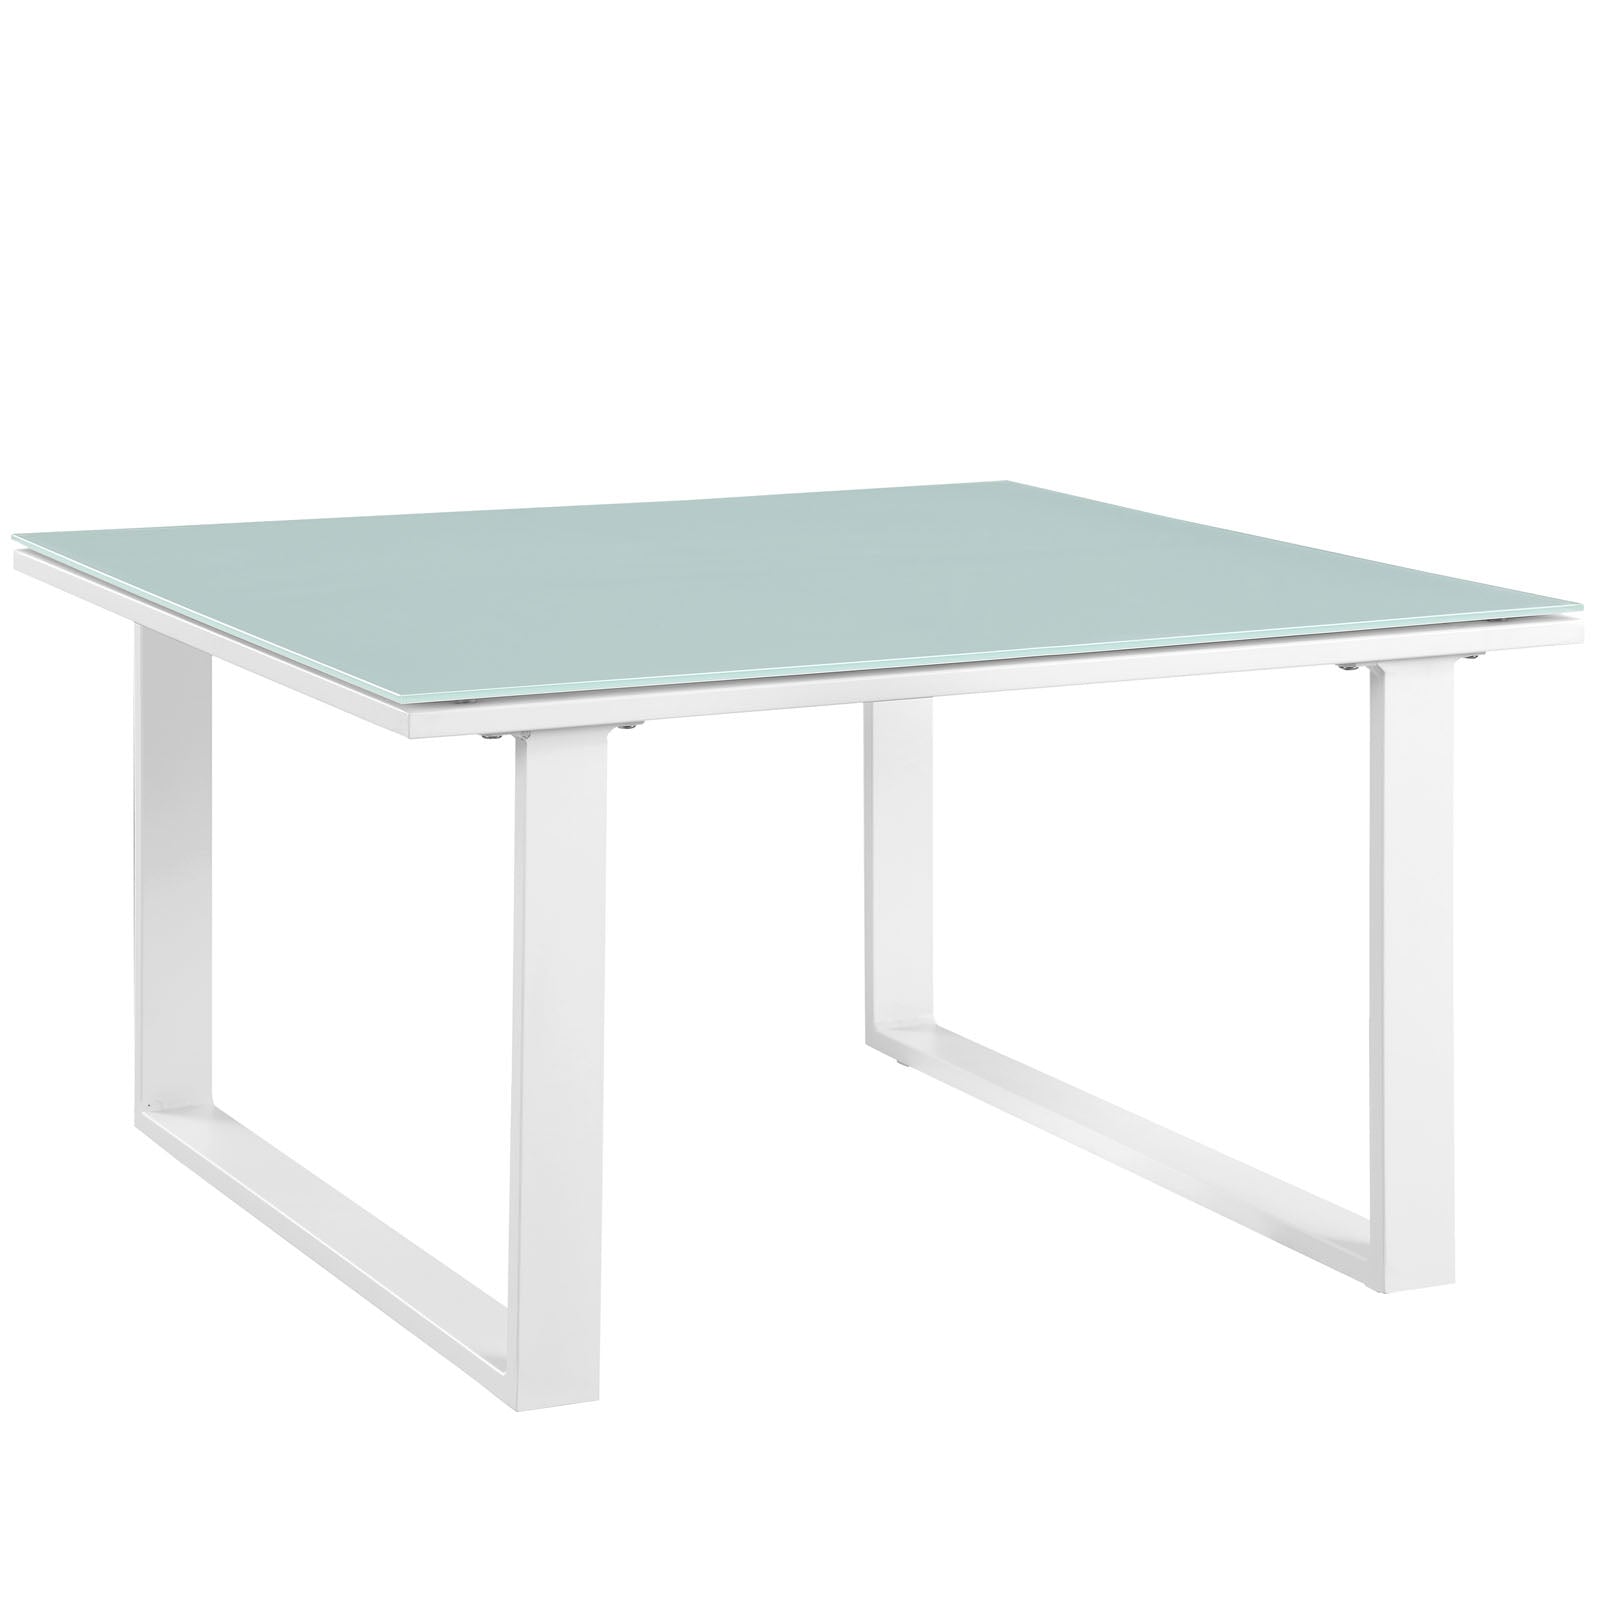 Fortuna Outdoor Patio Side Table - East Shore Modern Home Furnishings